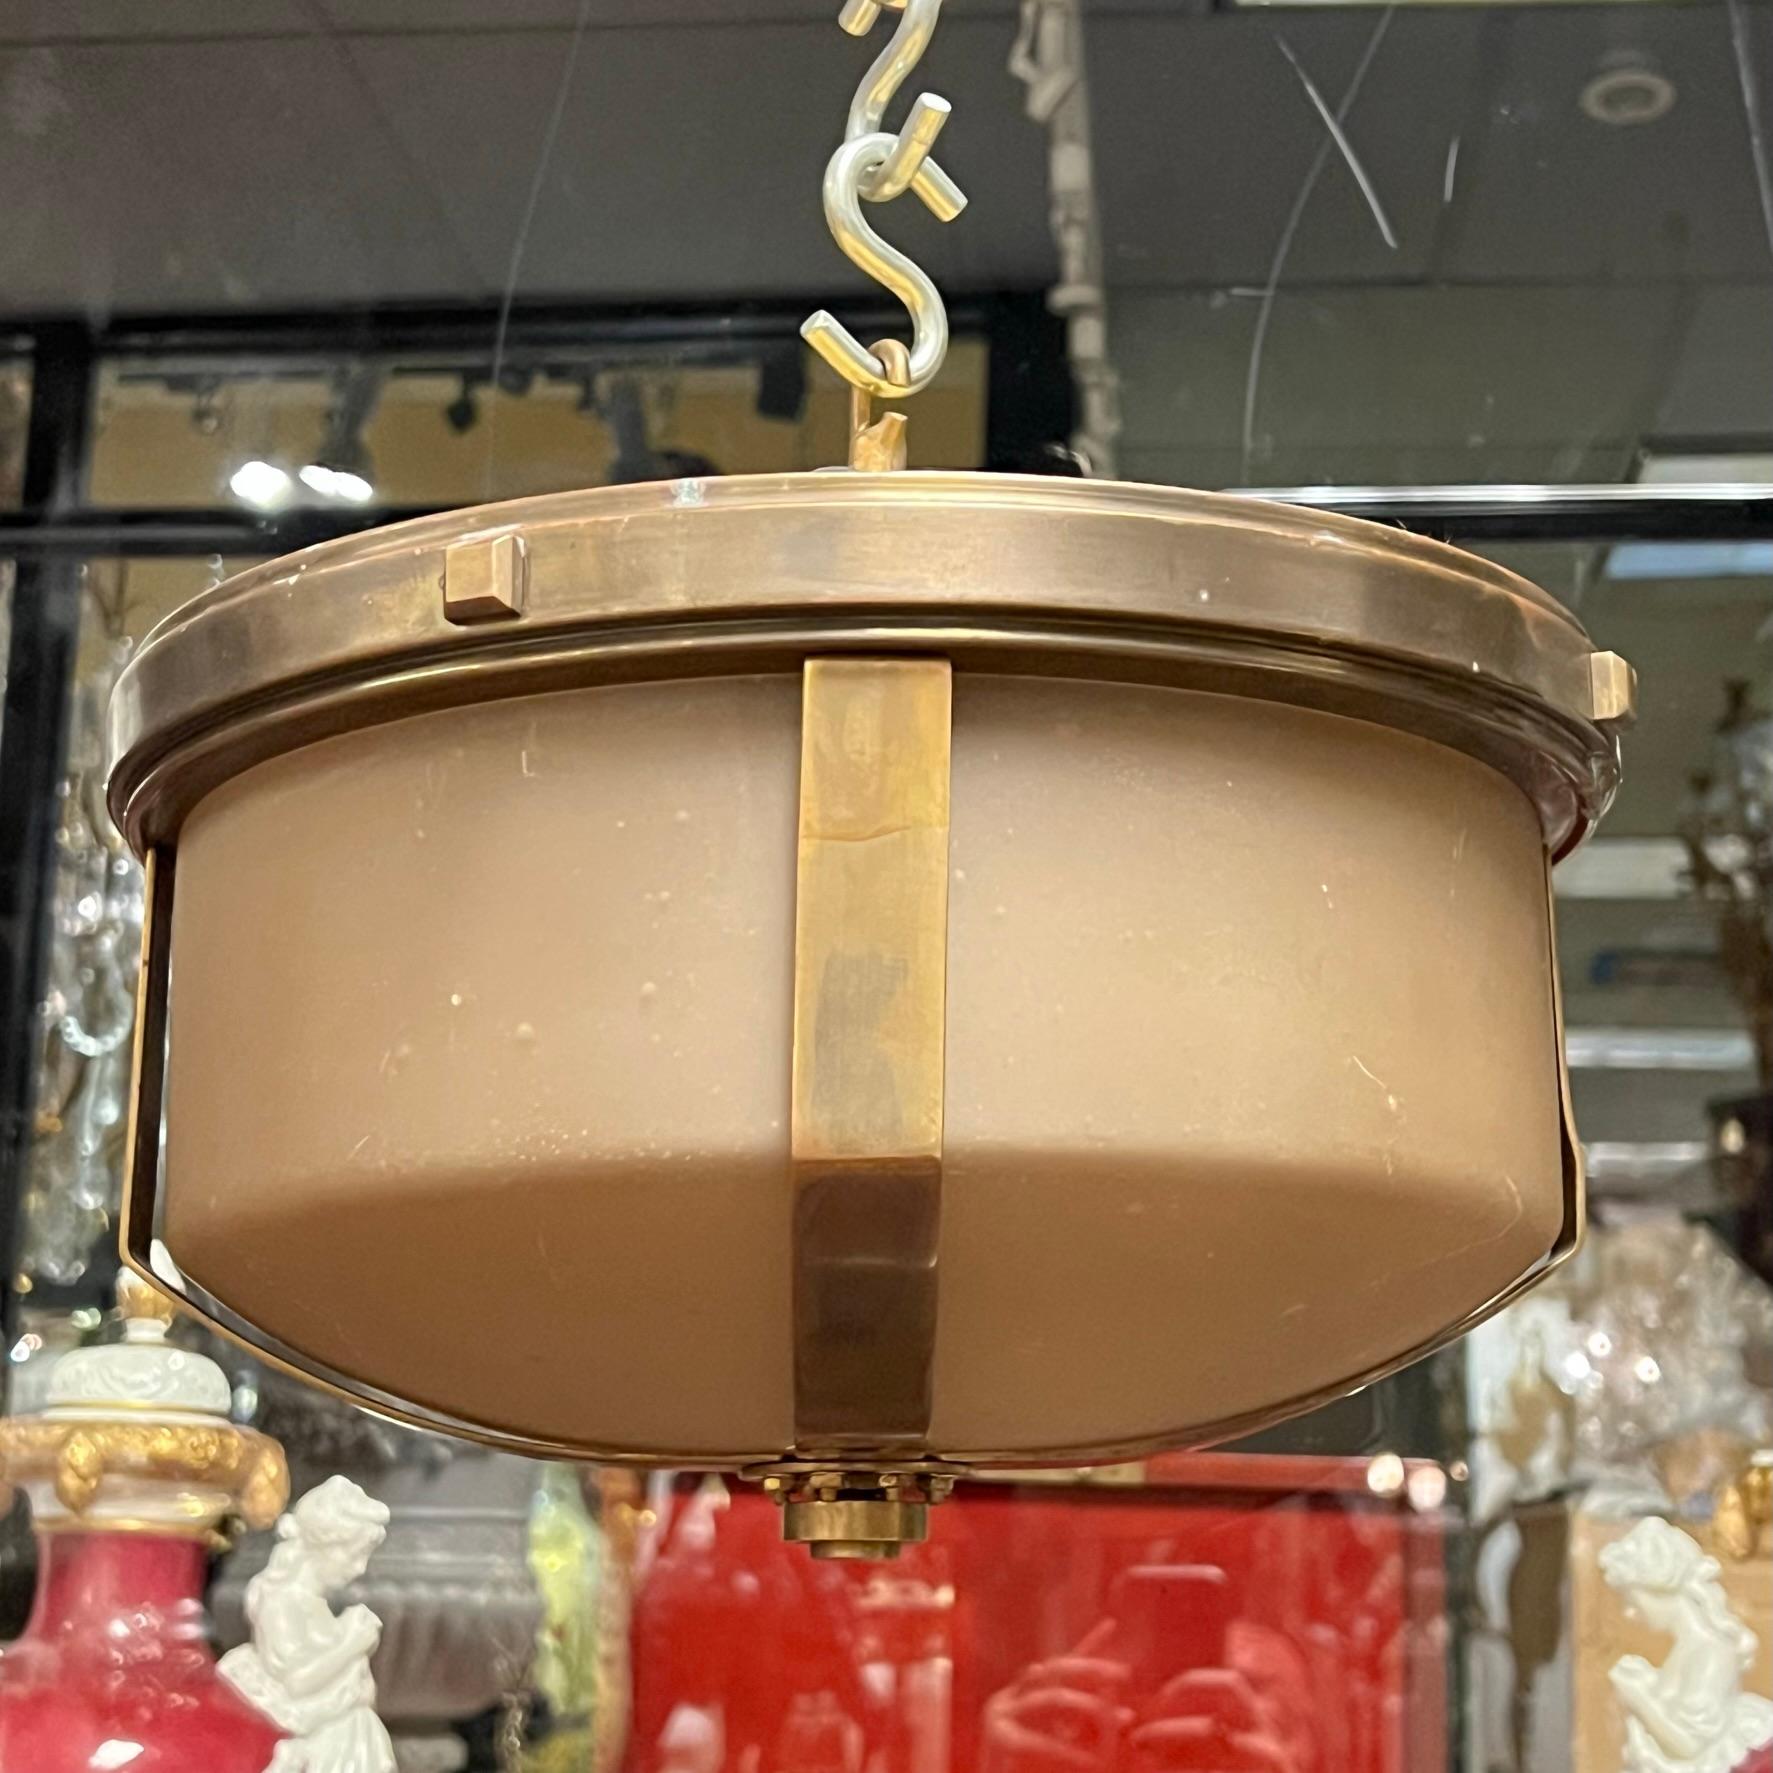 Vintage metal chandelier in the industrial, machine age style with bronze patina and taupe colored glass shade by Quoizel. Wired and ready for use.